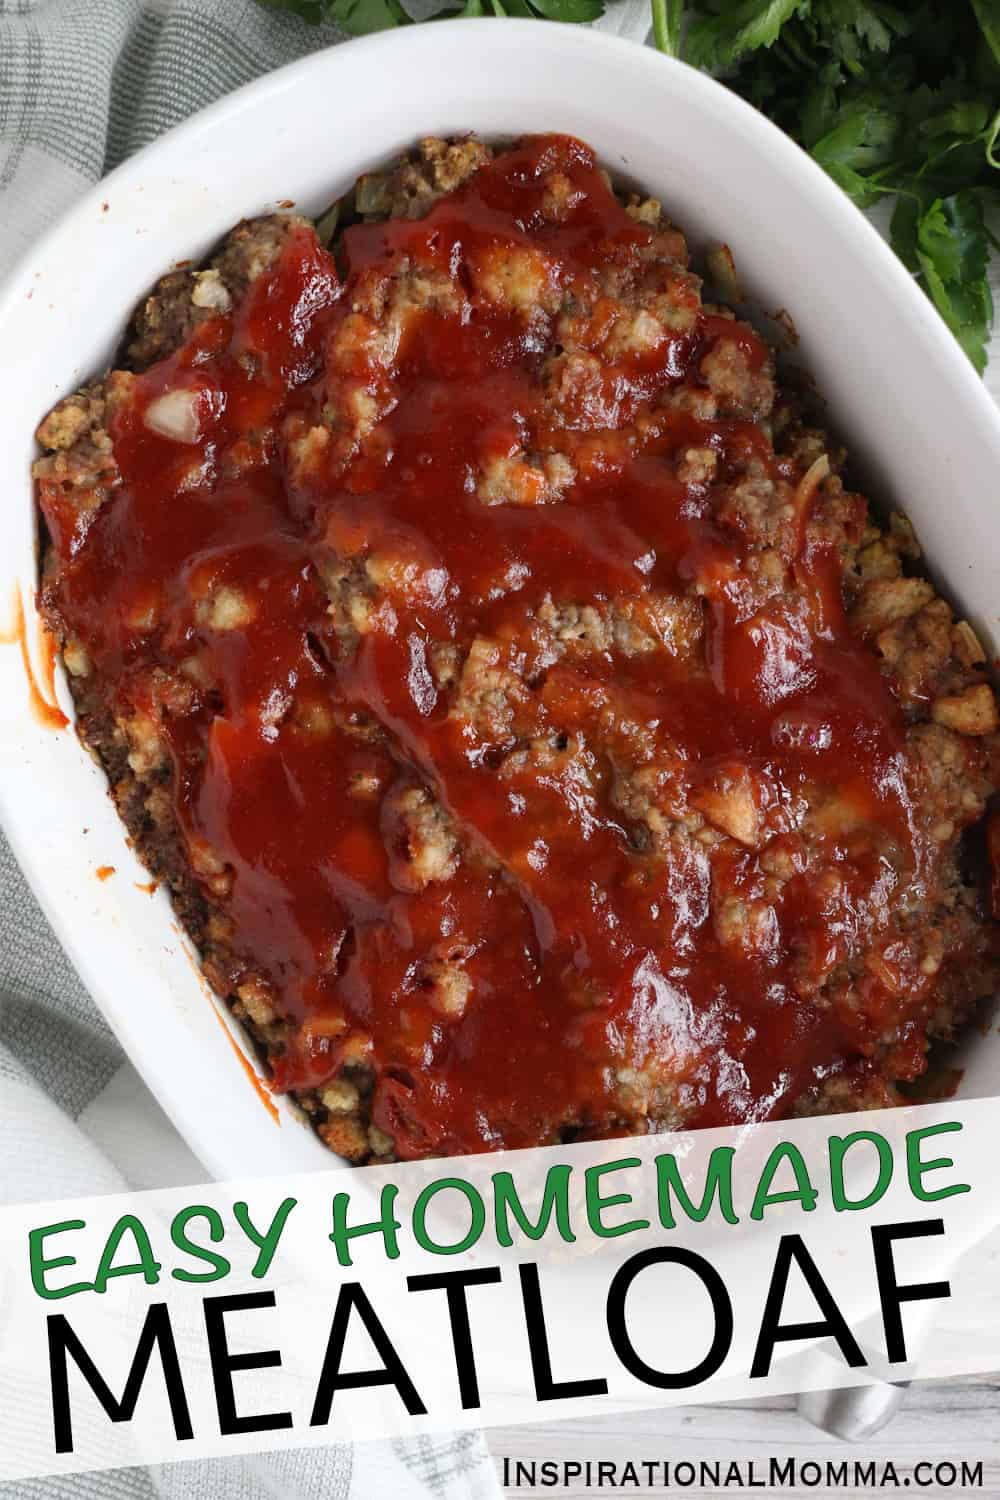 This Easy Homemade Meatloaf will become a family favorite. The sensational flavors will put a smile on everyone's face! Easy to make and perfectly tender! #inspirationalmomma #homemademeatloaf #meatloaf #homemade #dinner #easy #weeknightdinner #familydinner #groundbeef #hamburger